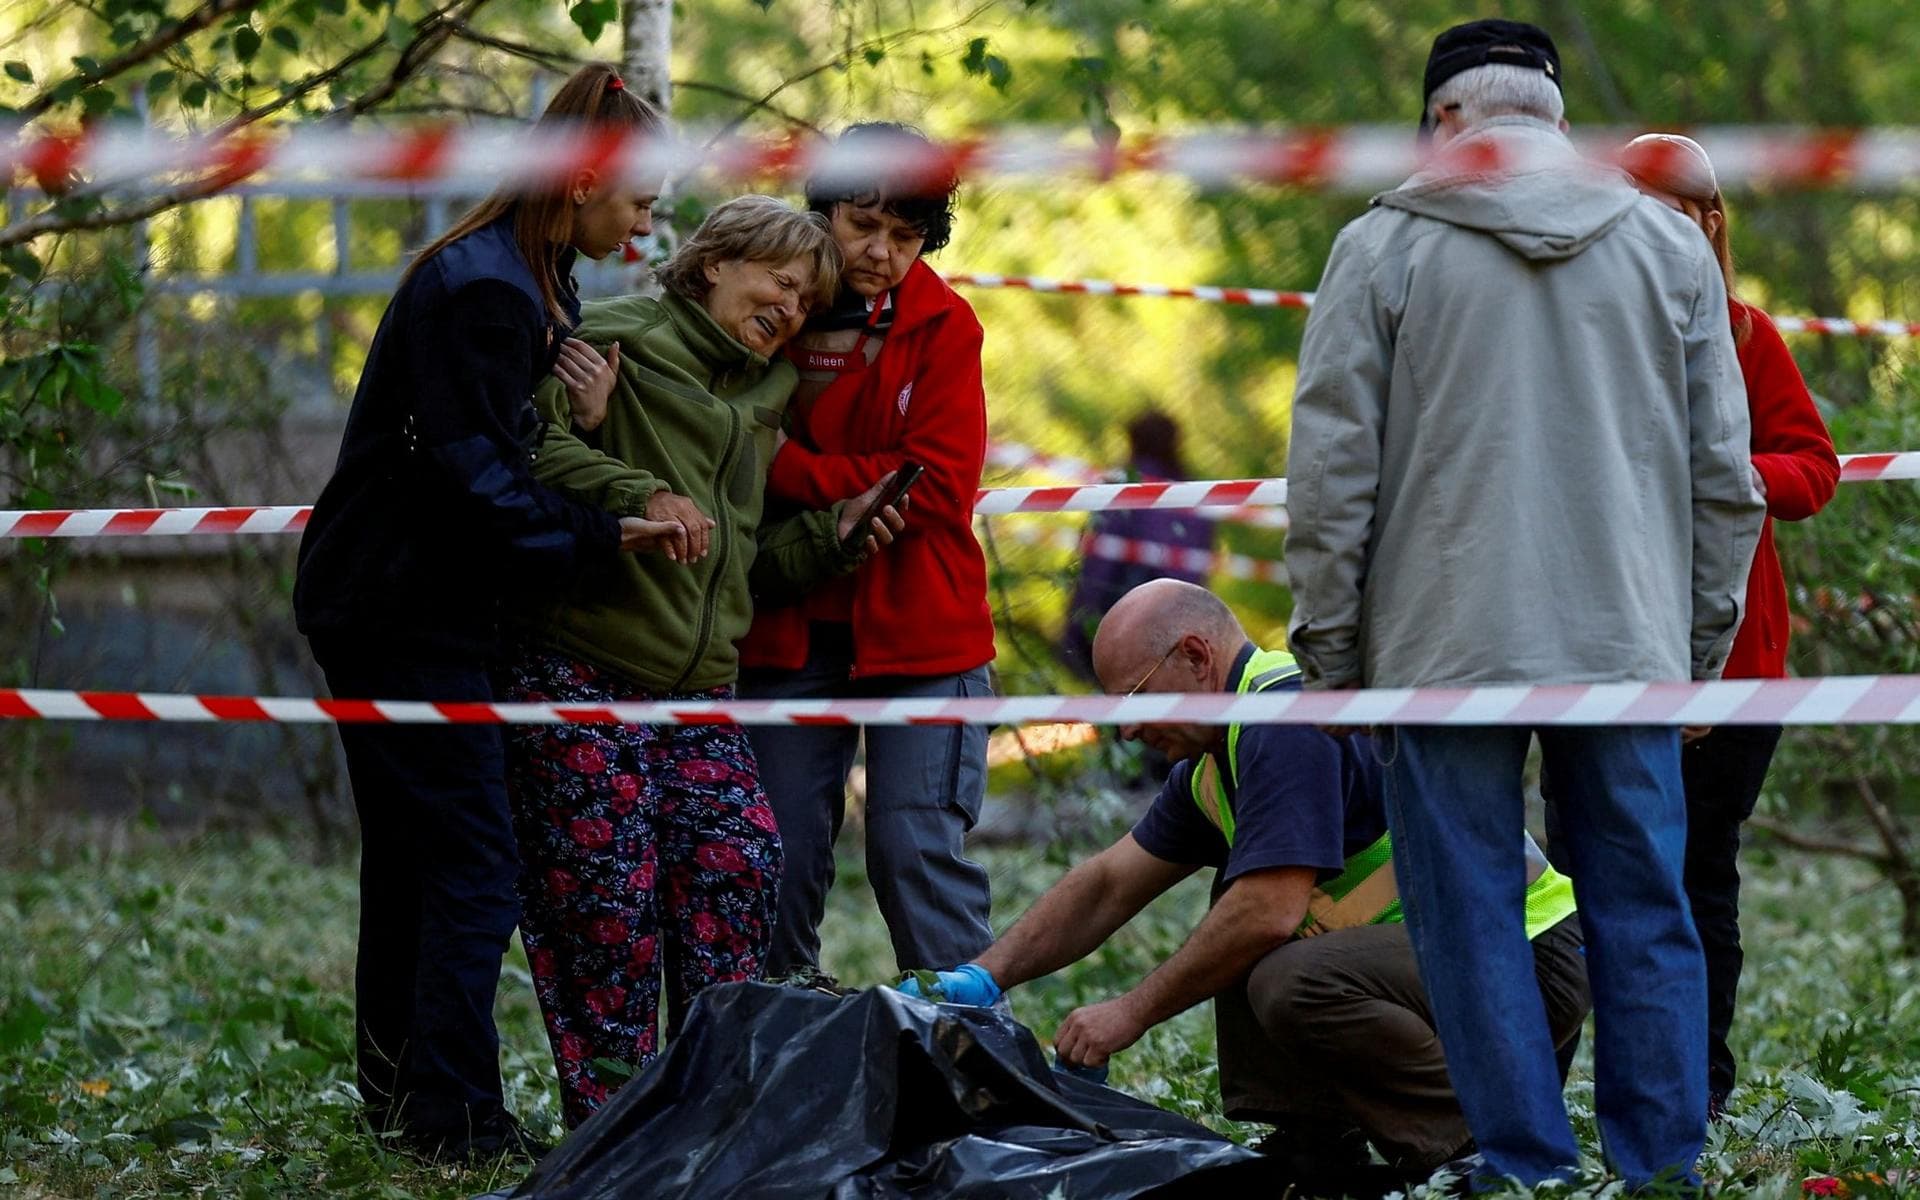 A relative reacts as she looks at the bodies of Olha Ivashko and her daughter Vika in Kyiv